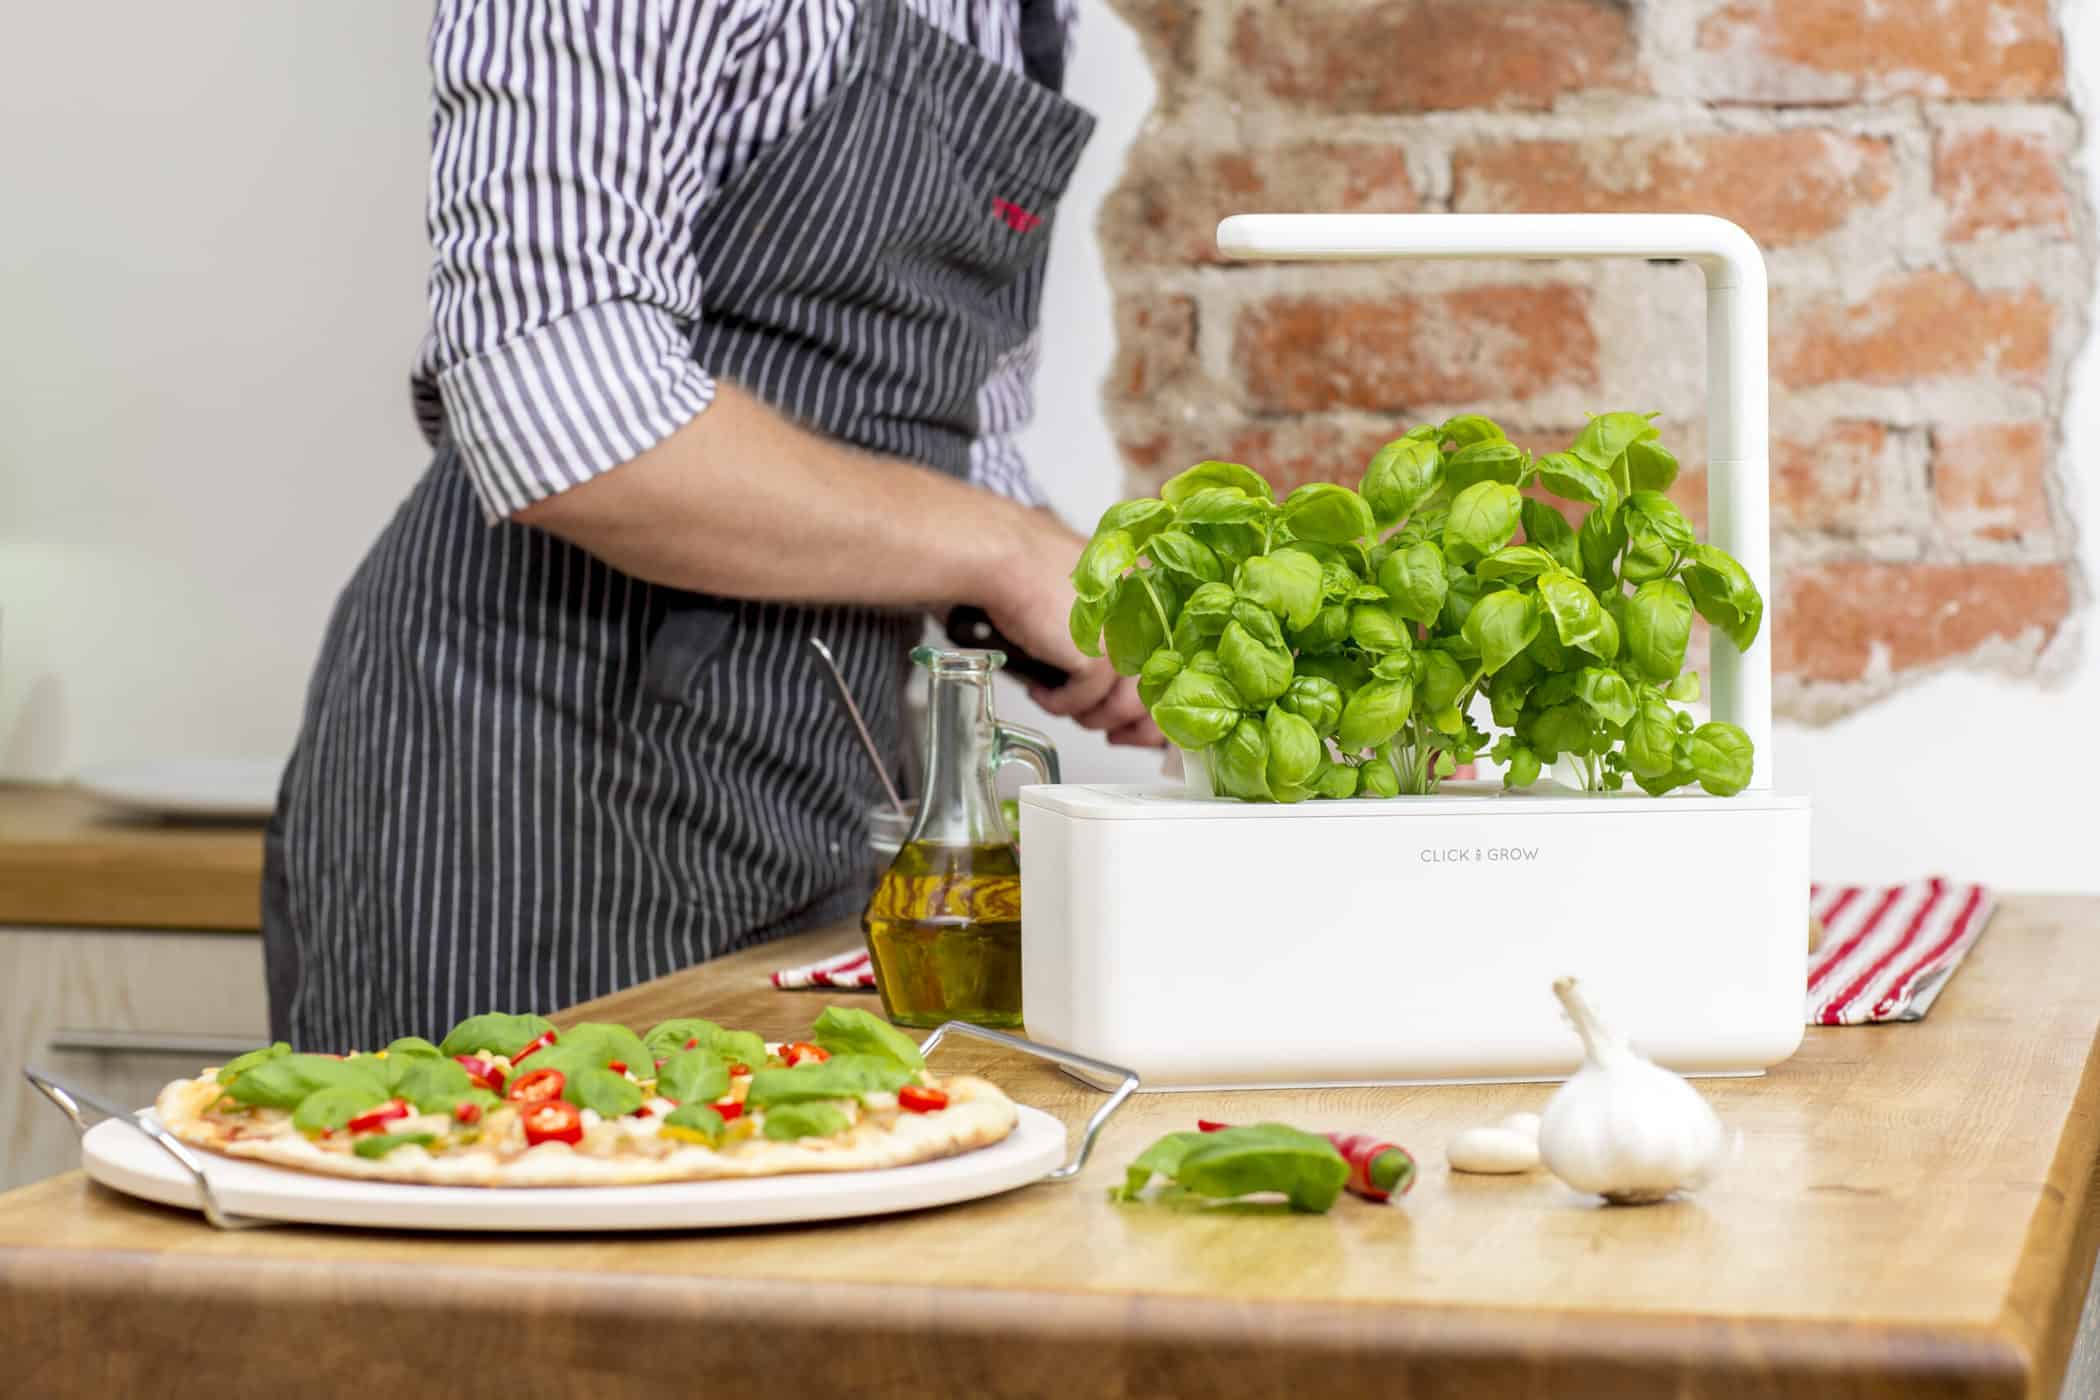 Click and grow smart garden basil pizza - photo by click and grow